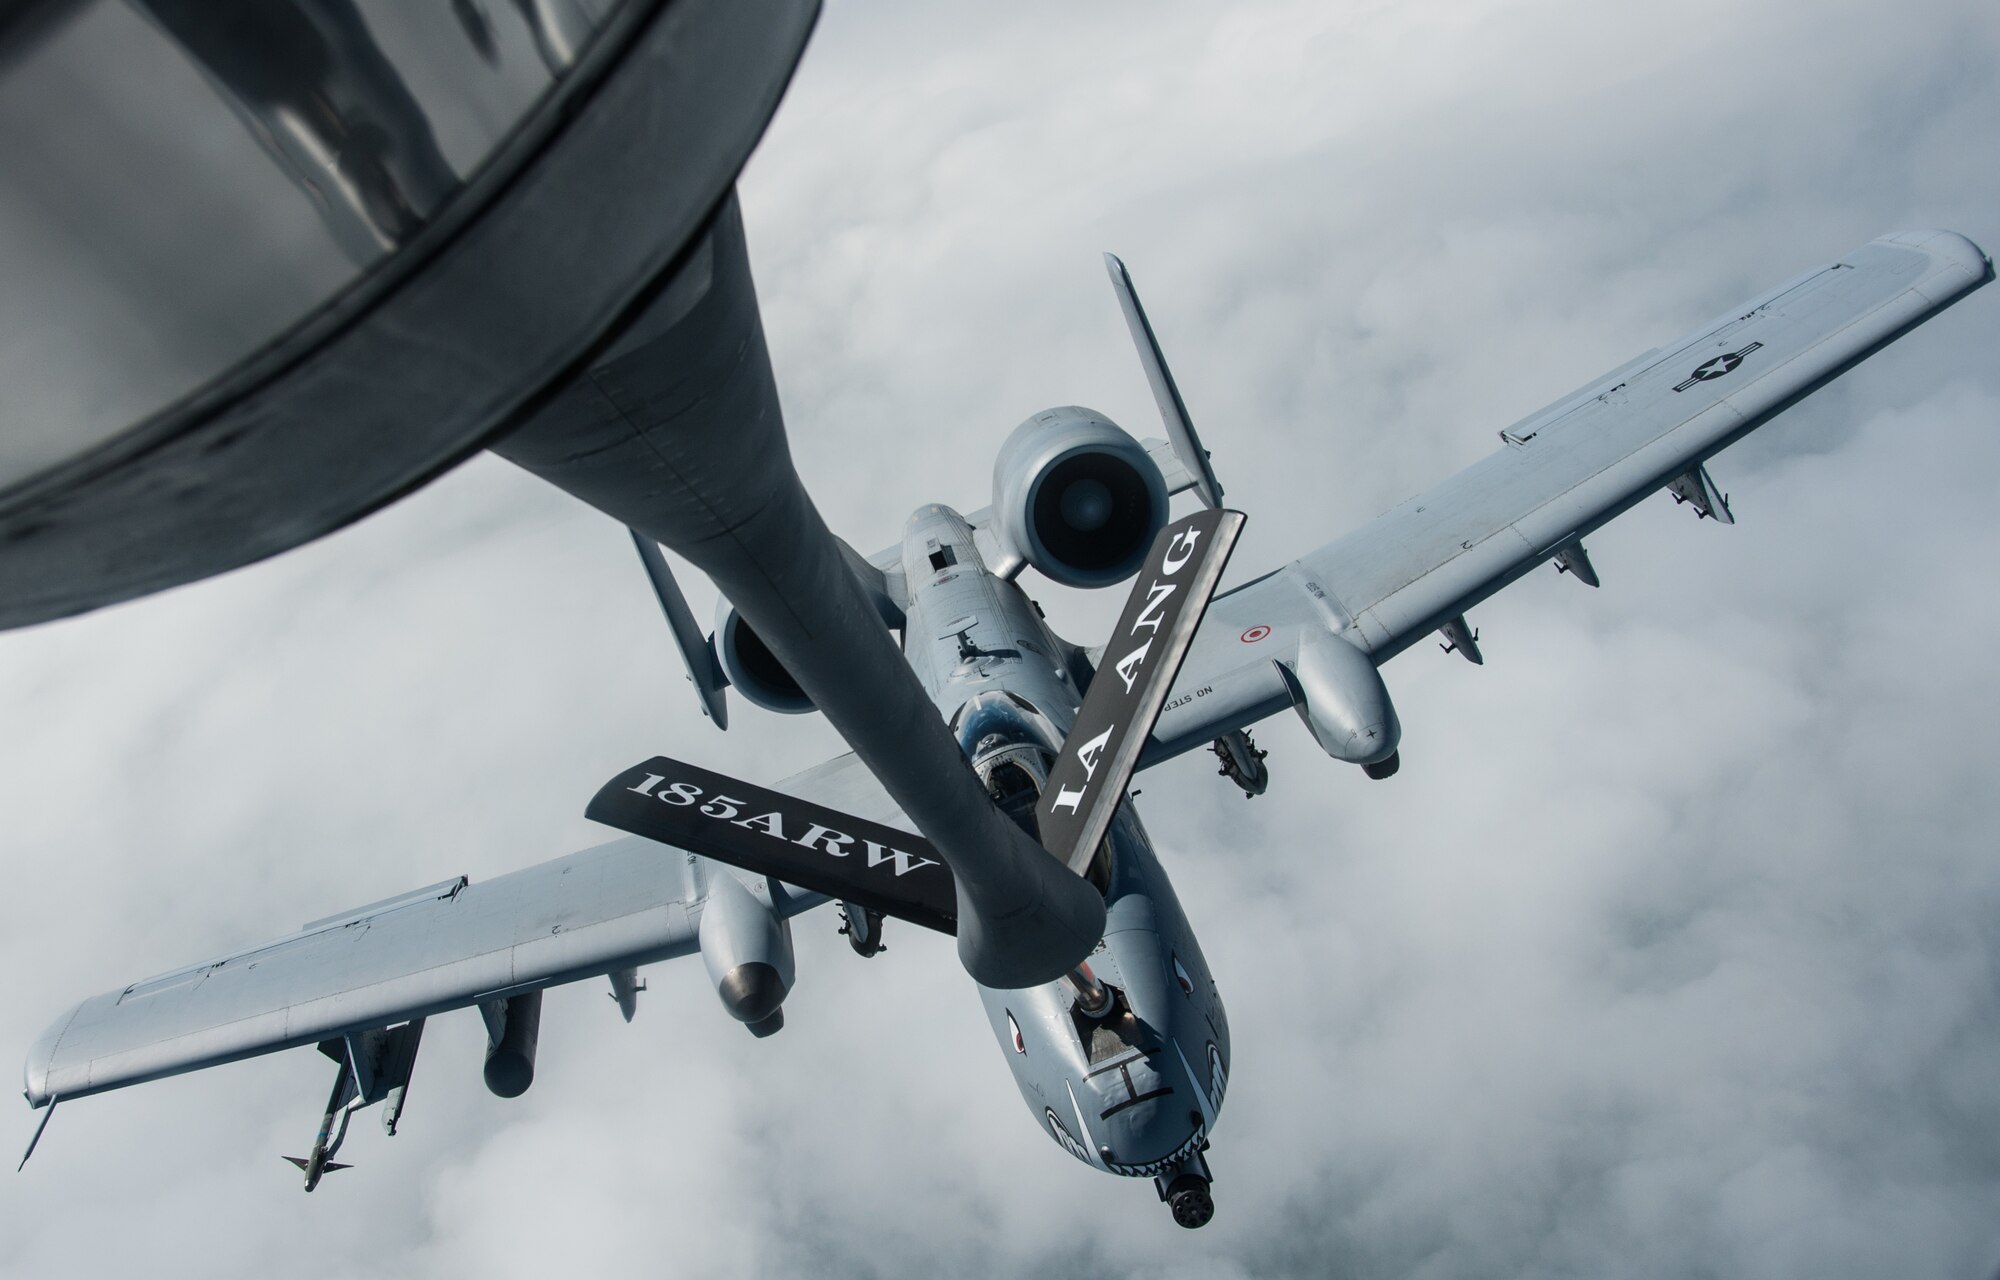 A KC-135 Stratotanker from the 185th Air Refueling Wing, Iowa Air National Guard, refuels an A-10 from the 442nd Fighter Wing, Whiteman Air Force Base, Missouri, during a flying training deployment at Ämari Air Base, Estonia, July 26, 2016. This is the first time personnel and aircraft from the 185th ARW are providing support for an Estonian FTD which allows them to further develop relationships with their NATO allies. (U.S. Air Force photo by Senior Airman Missy Sterling/released)